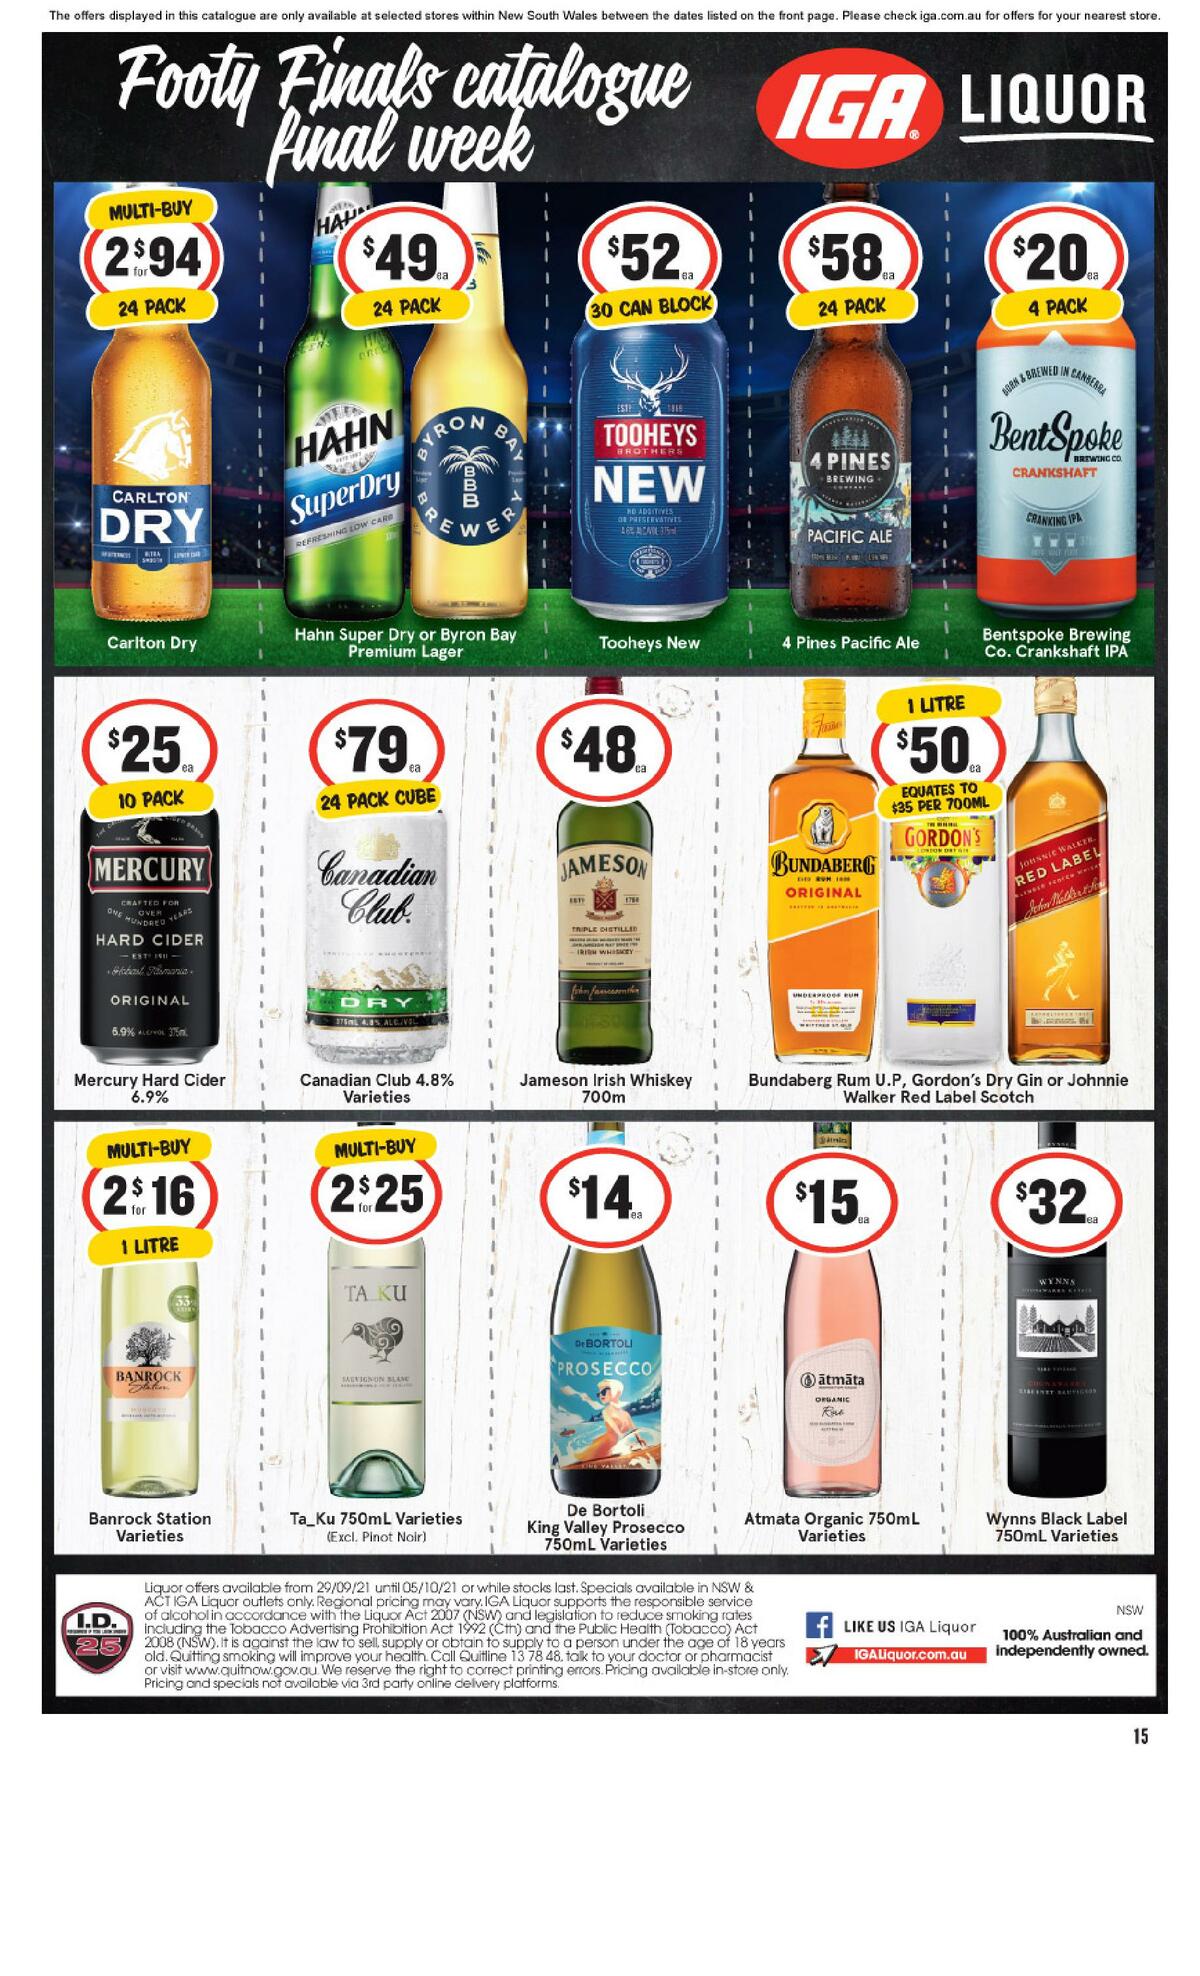 IGA Catalogues from 29 September